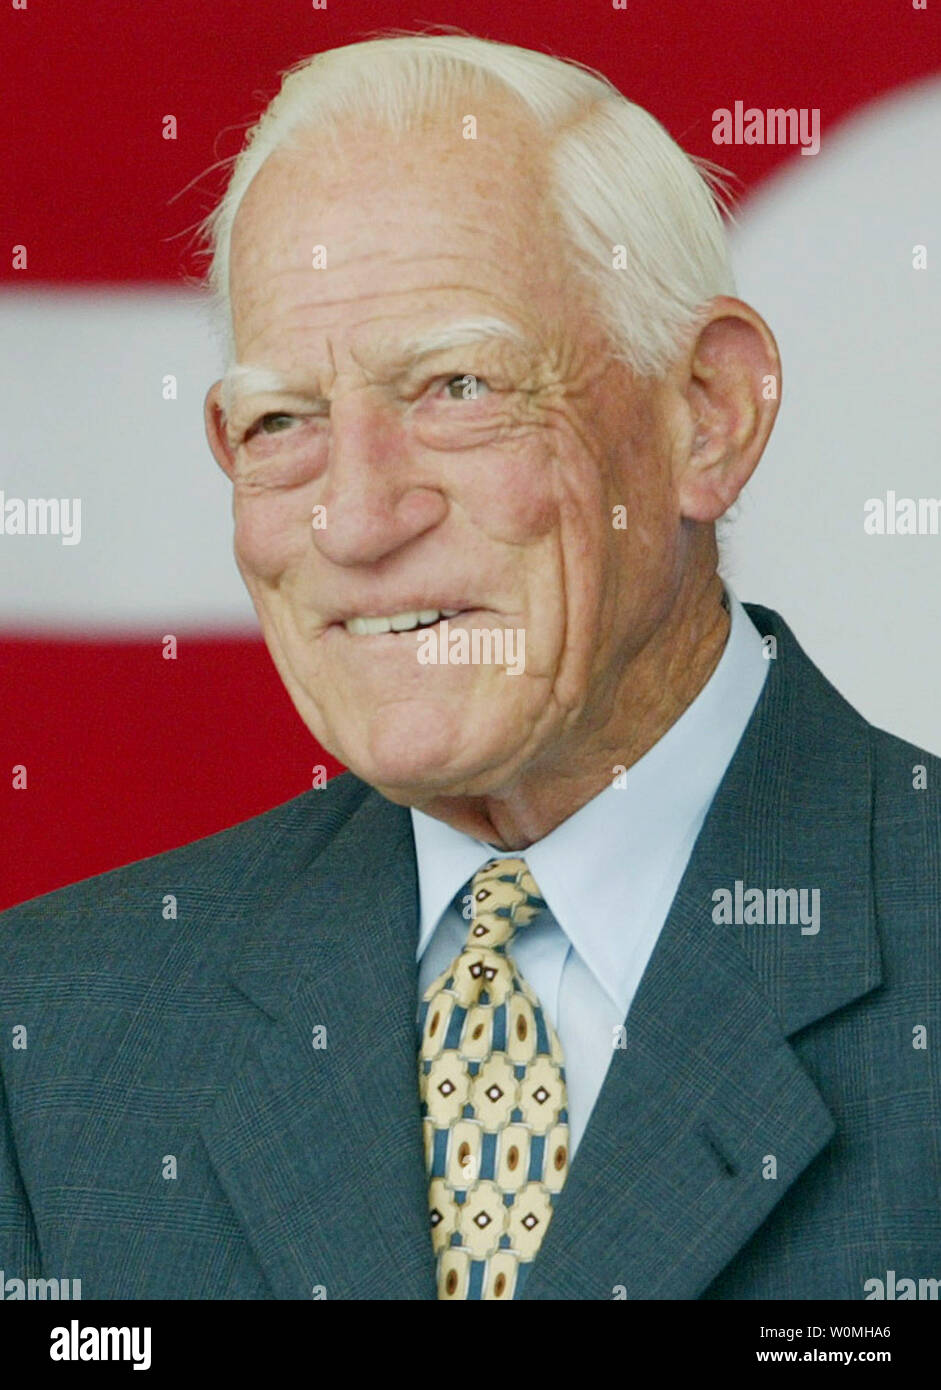 Hall of Fame Manager Sparky Anderson Dies at 76 - WSJ